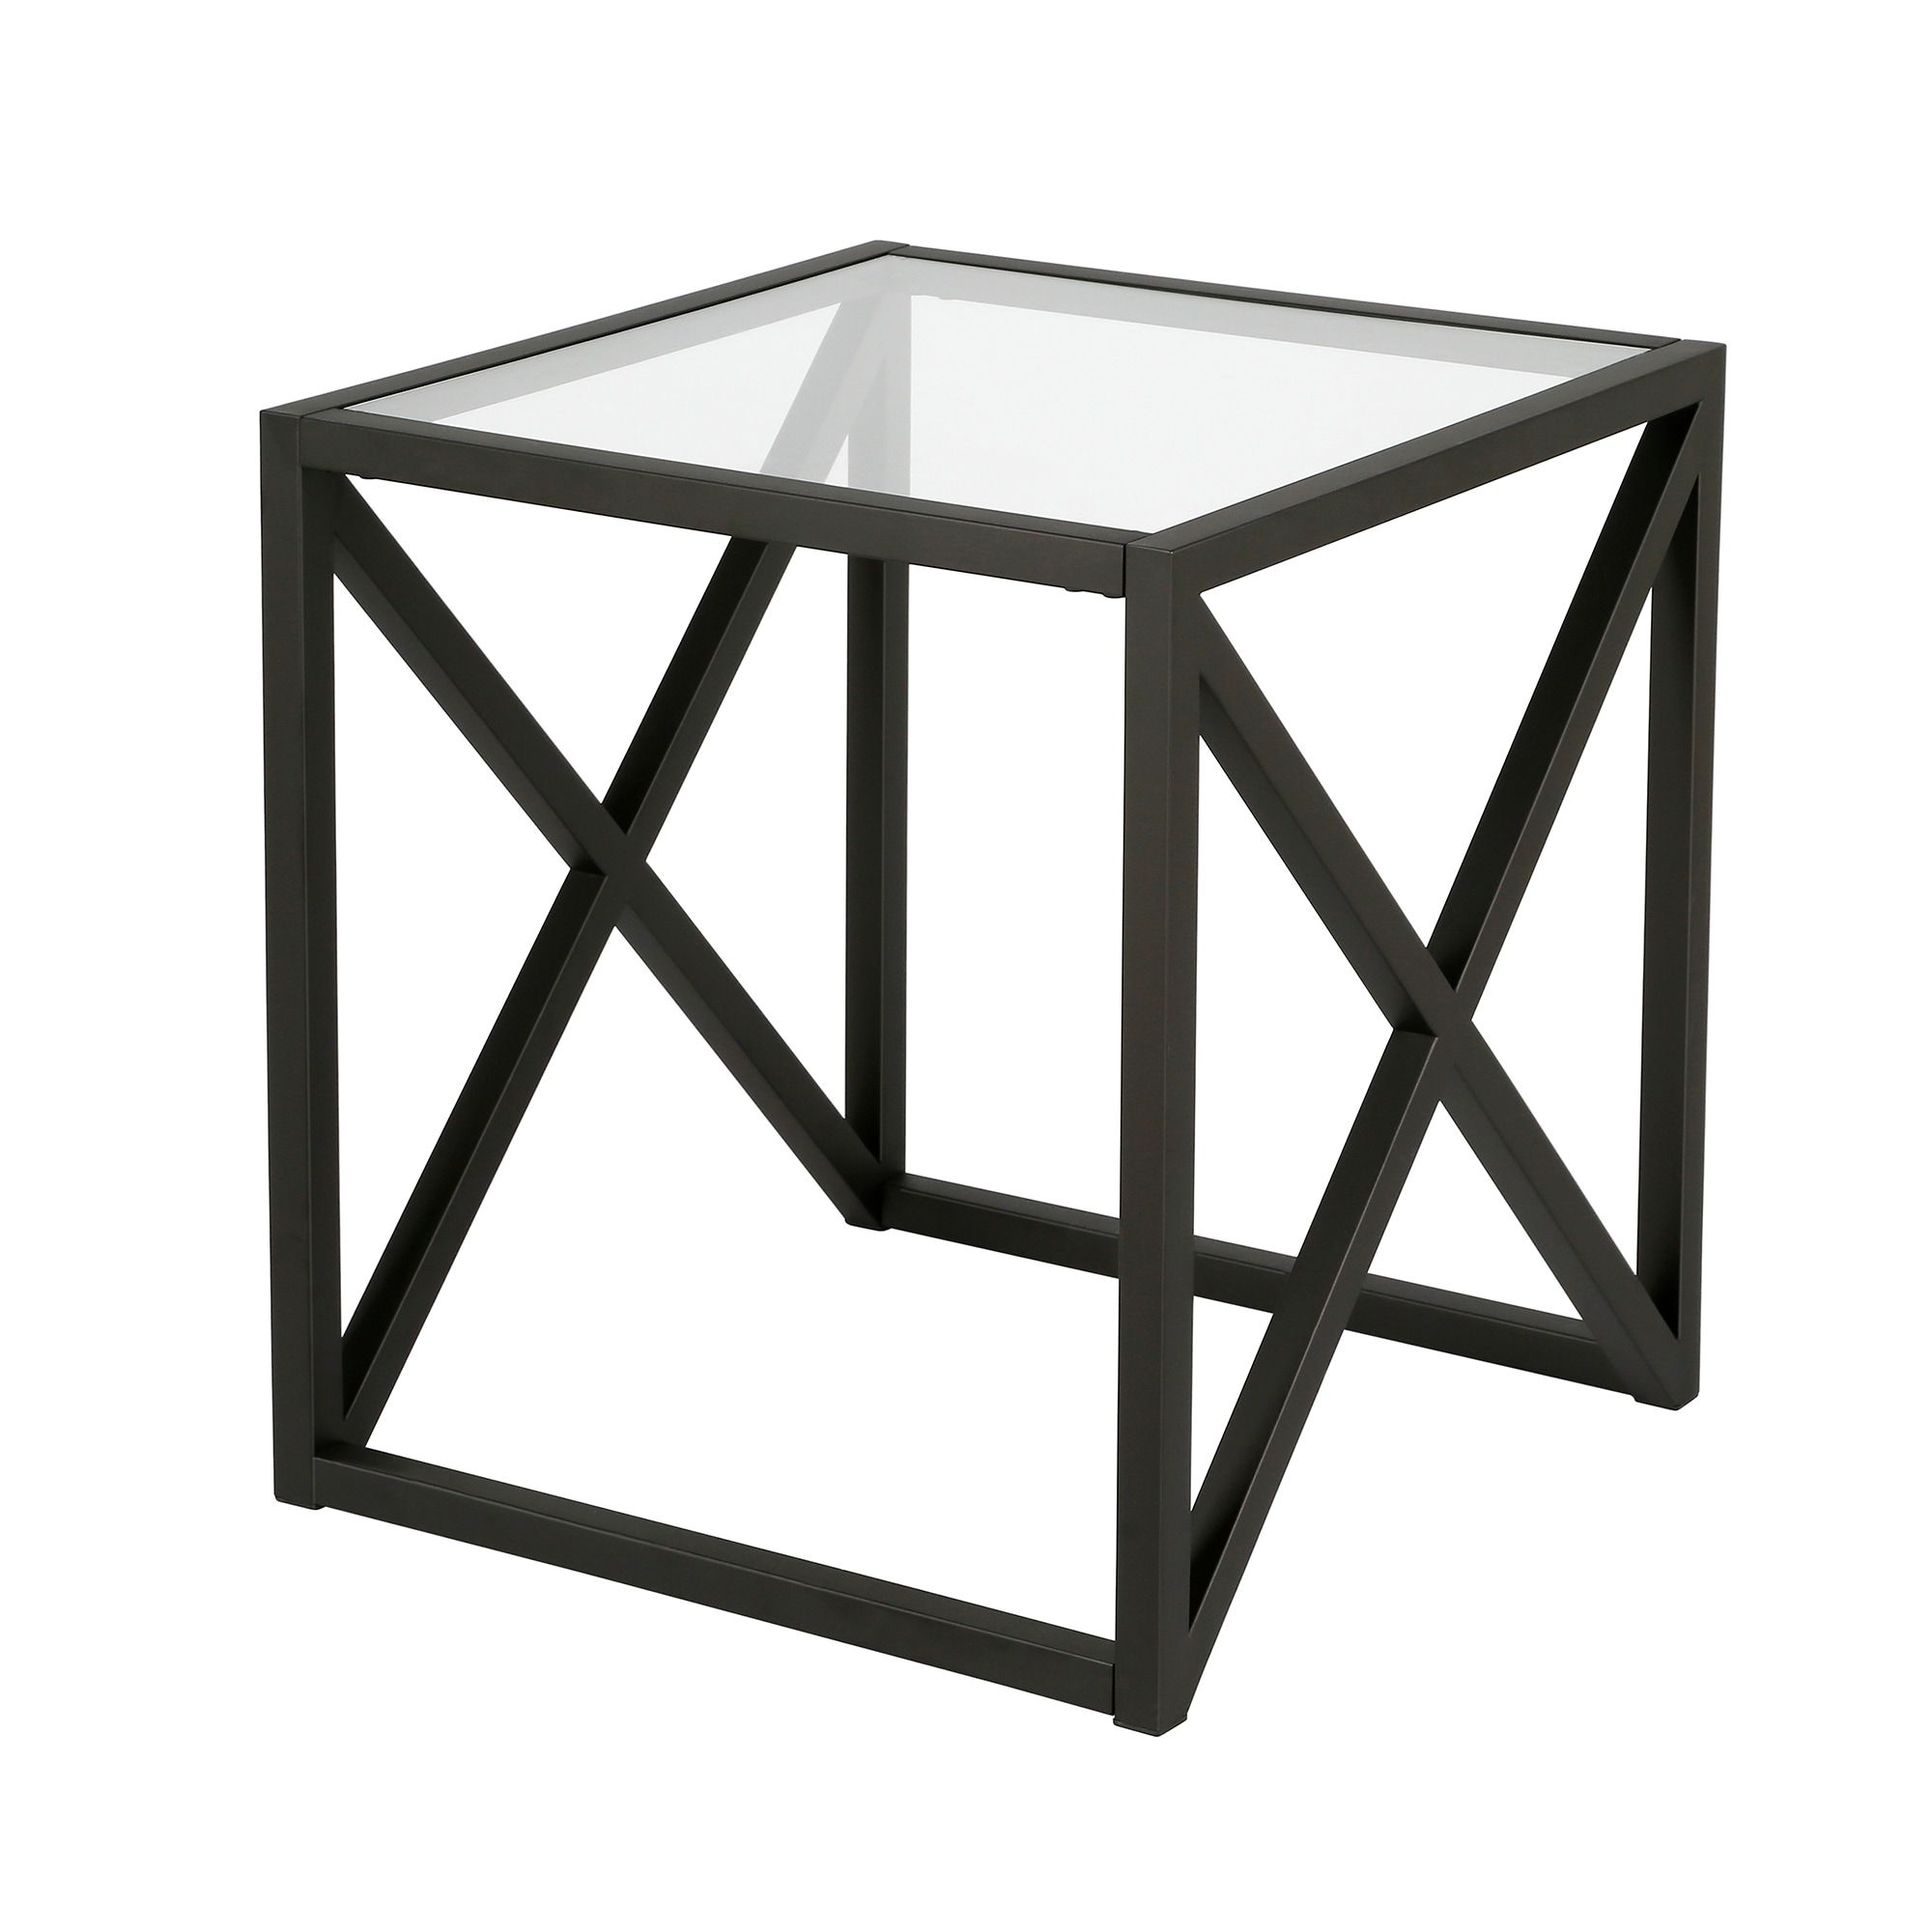 Most Popular Calix Metal End Tables At Lowes With Addison&lane Calix Square Tables (View 7 of 15)